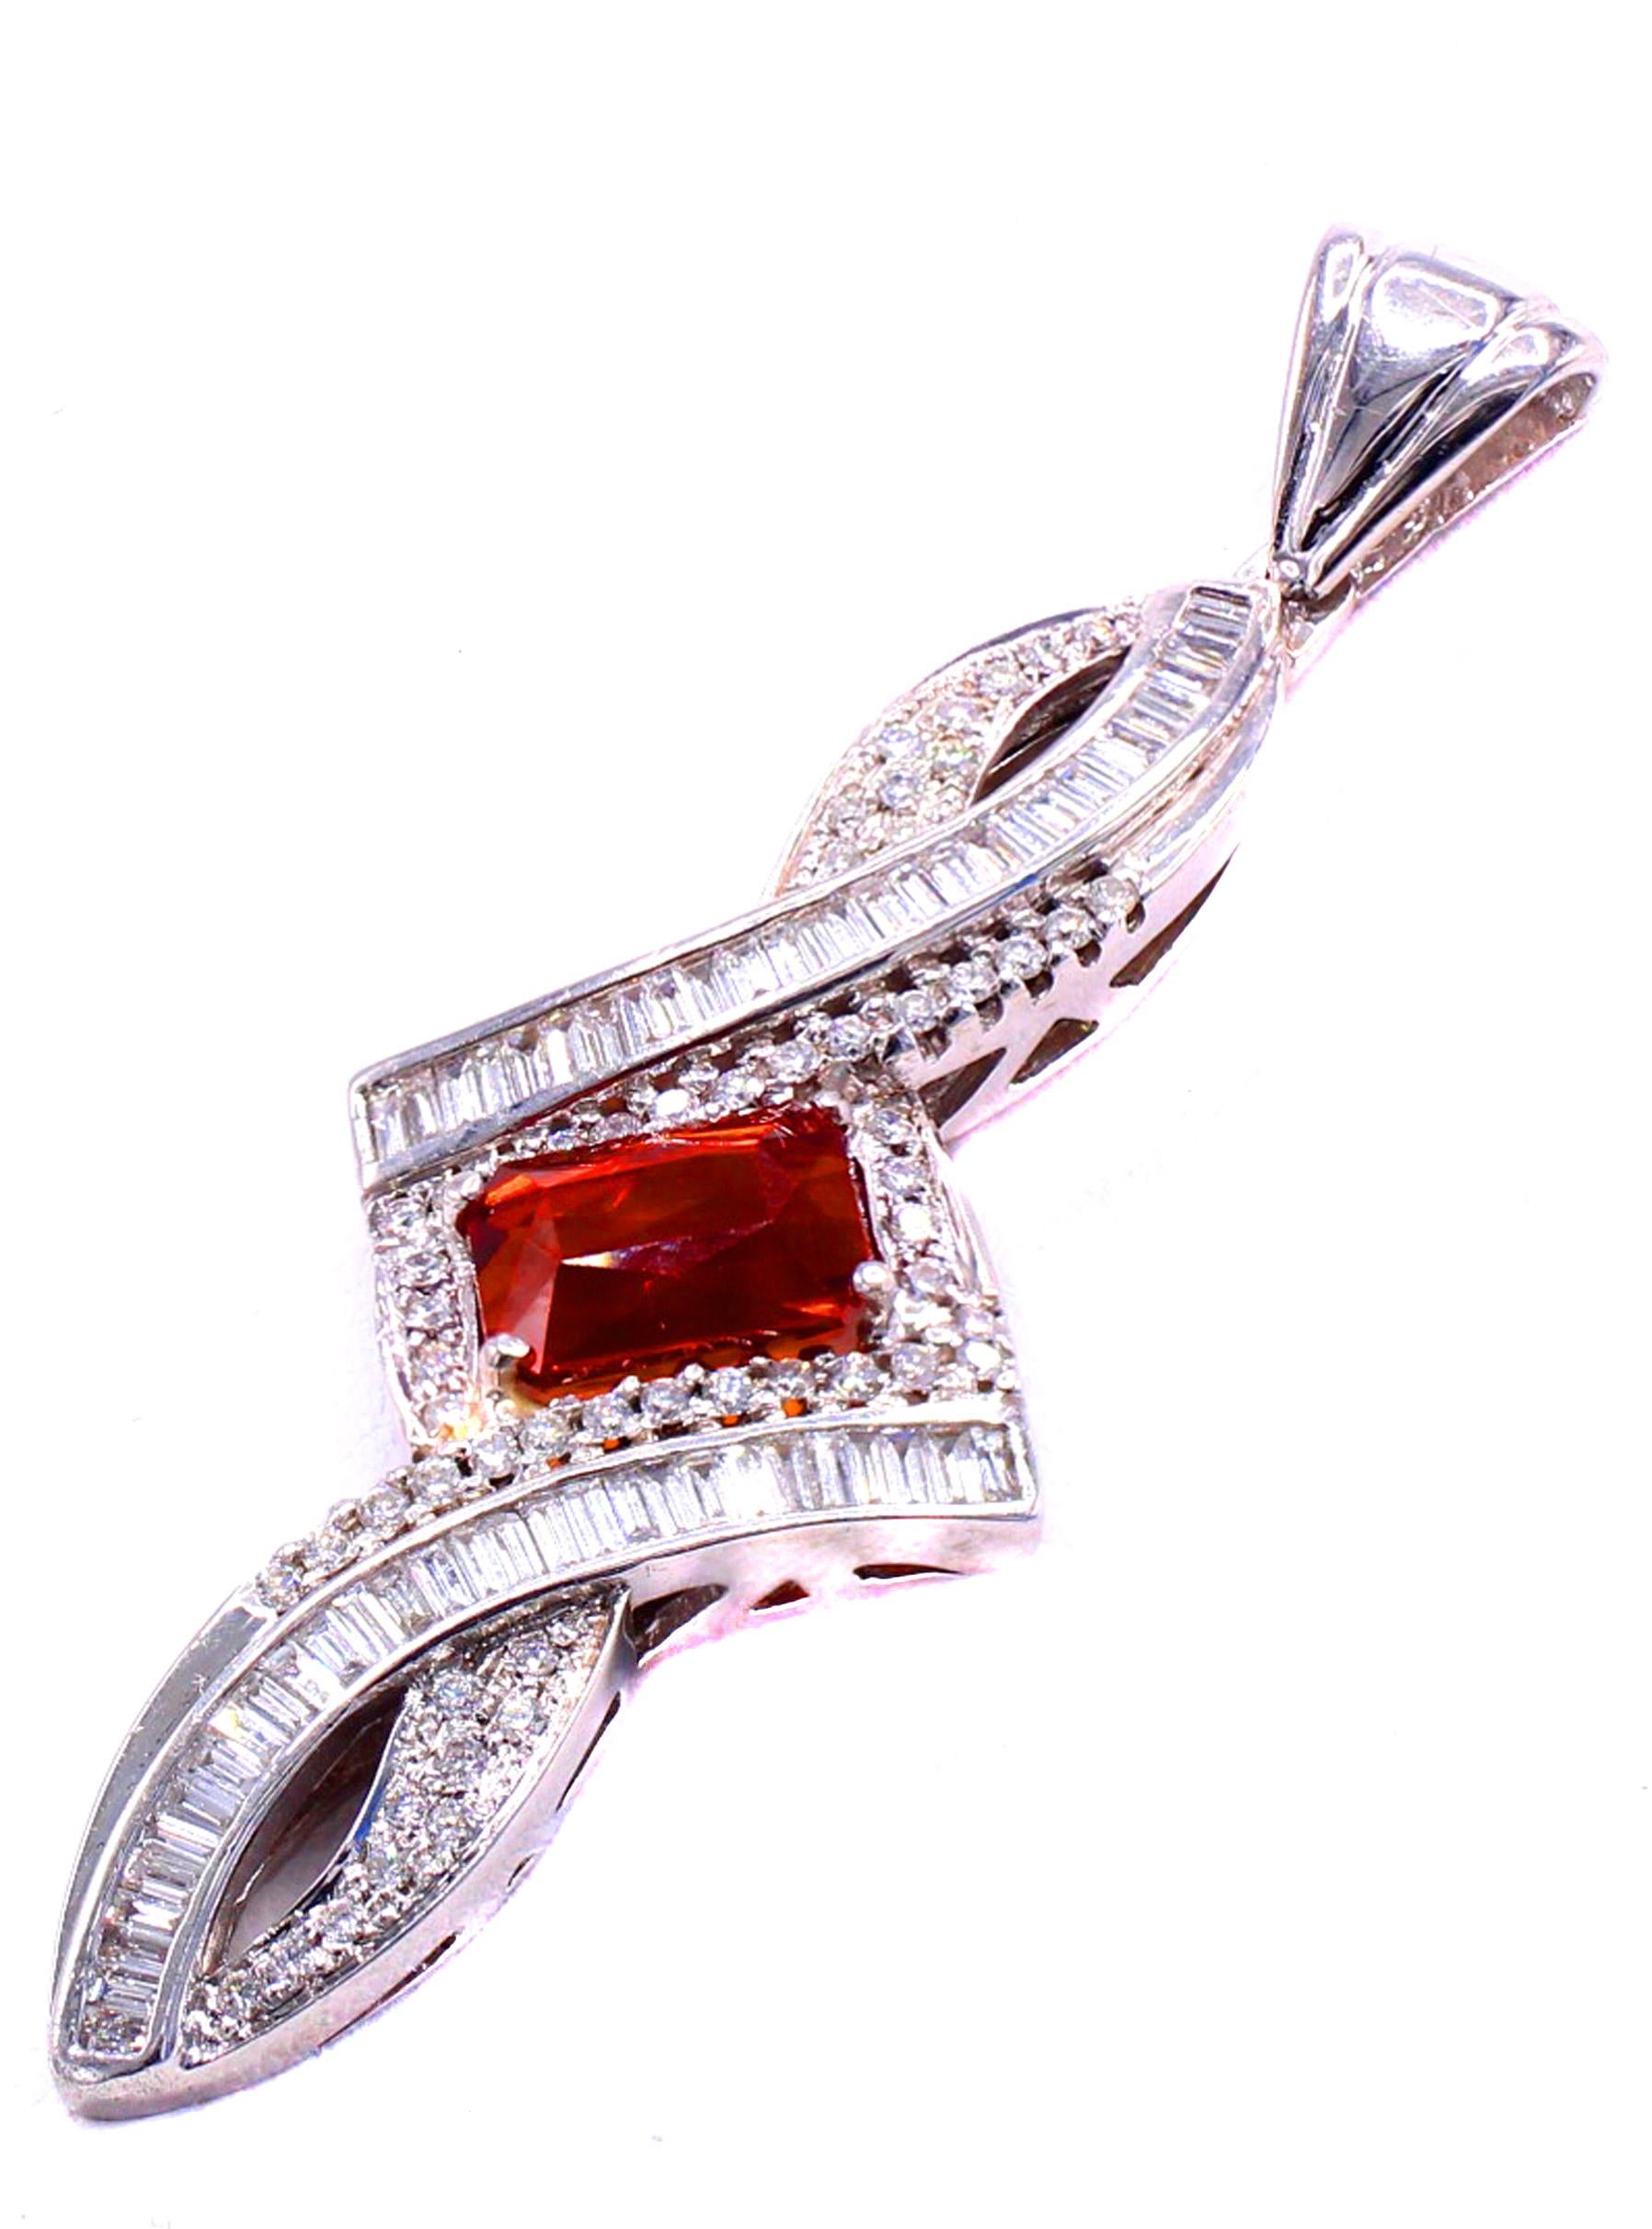 A vibrant orange Spessartite Garnet also known as Mandarin Garnet is the center piece of this beautifully designed pendant. Set in 18 karat white gold the center gem, weighing approximately 3 carats is surrounded by 58 baguette cut and 59 round